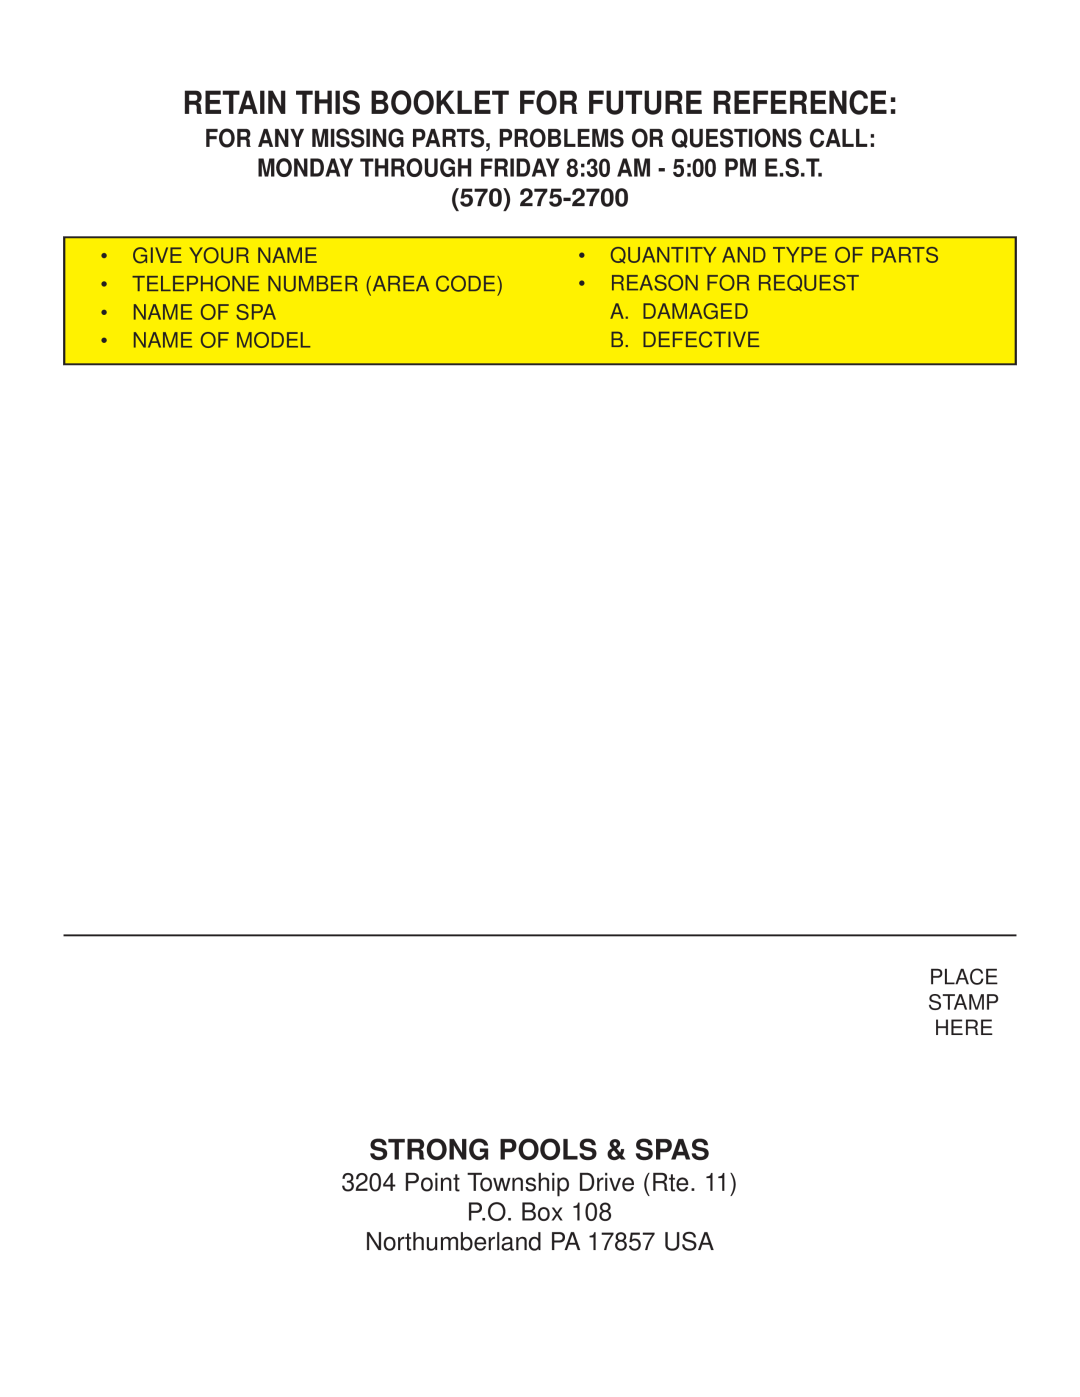 Strong Pools and Spas Freedom Retain This Booklet For Future Reference, For Any Missing Parts, Problems Or Questions Call 